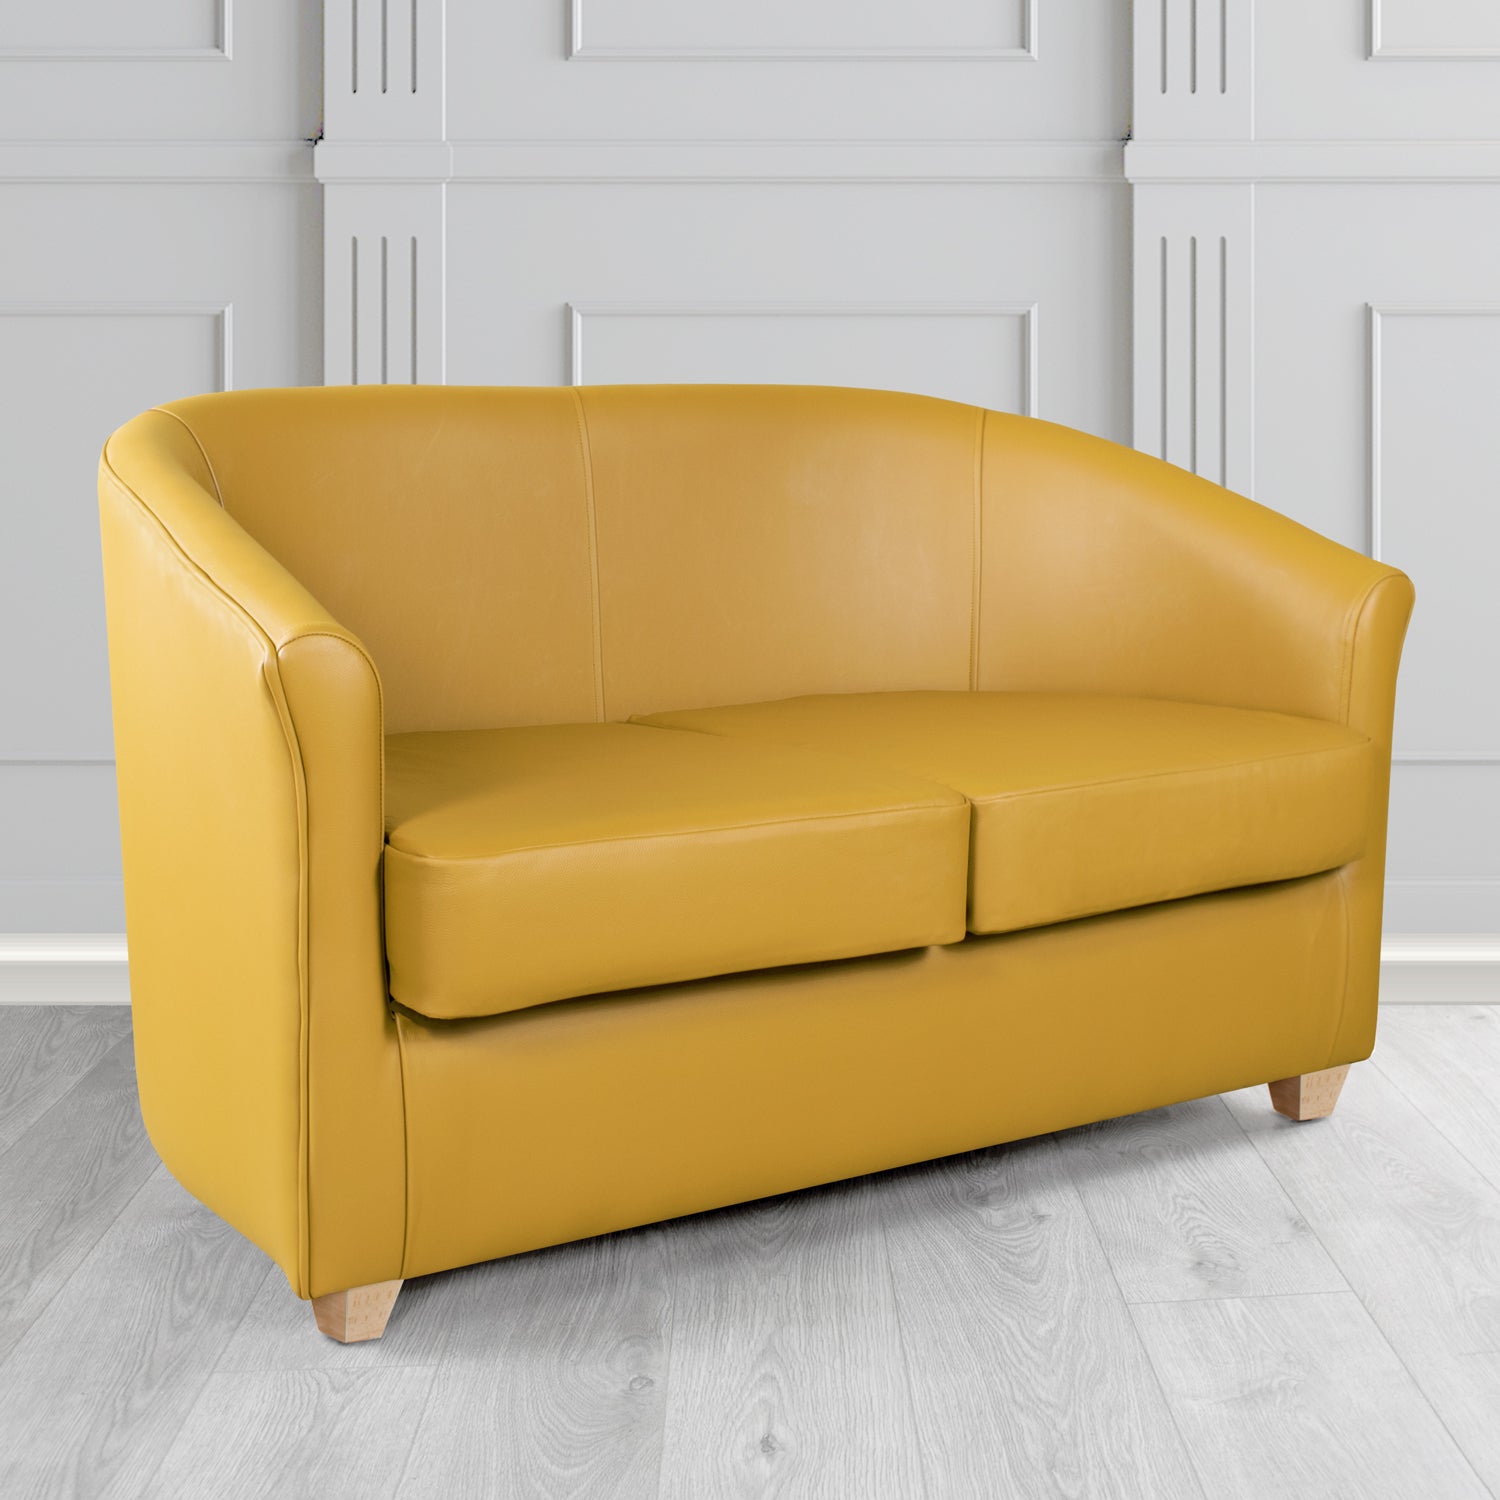 Cannes 2 Seater Tub Sofa in Just Colour Golden Honey Crib 5 Faux Leather - The Tub Chair Shop